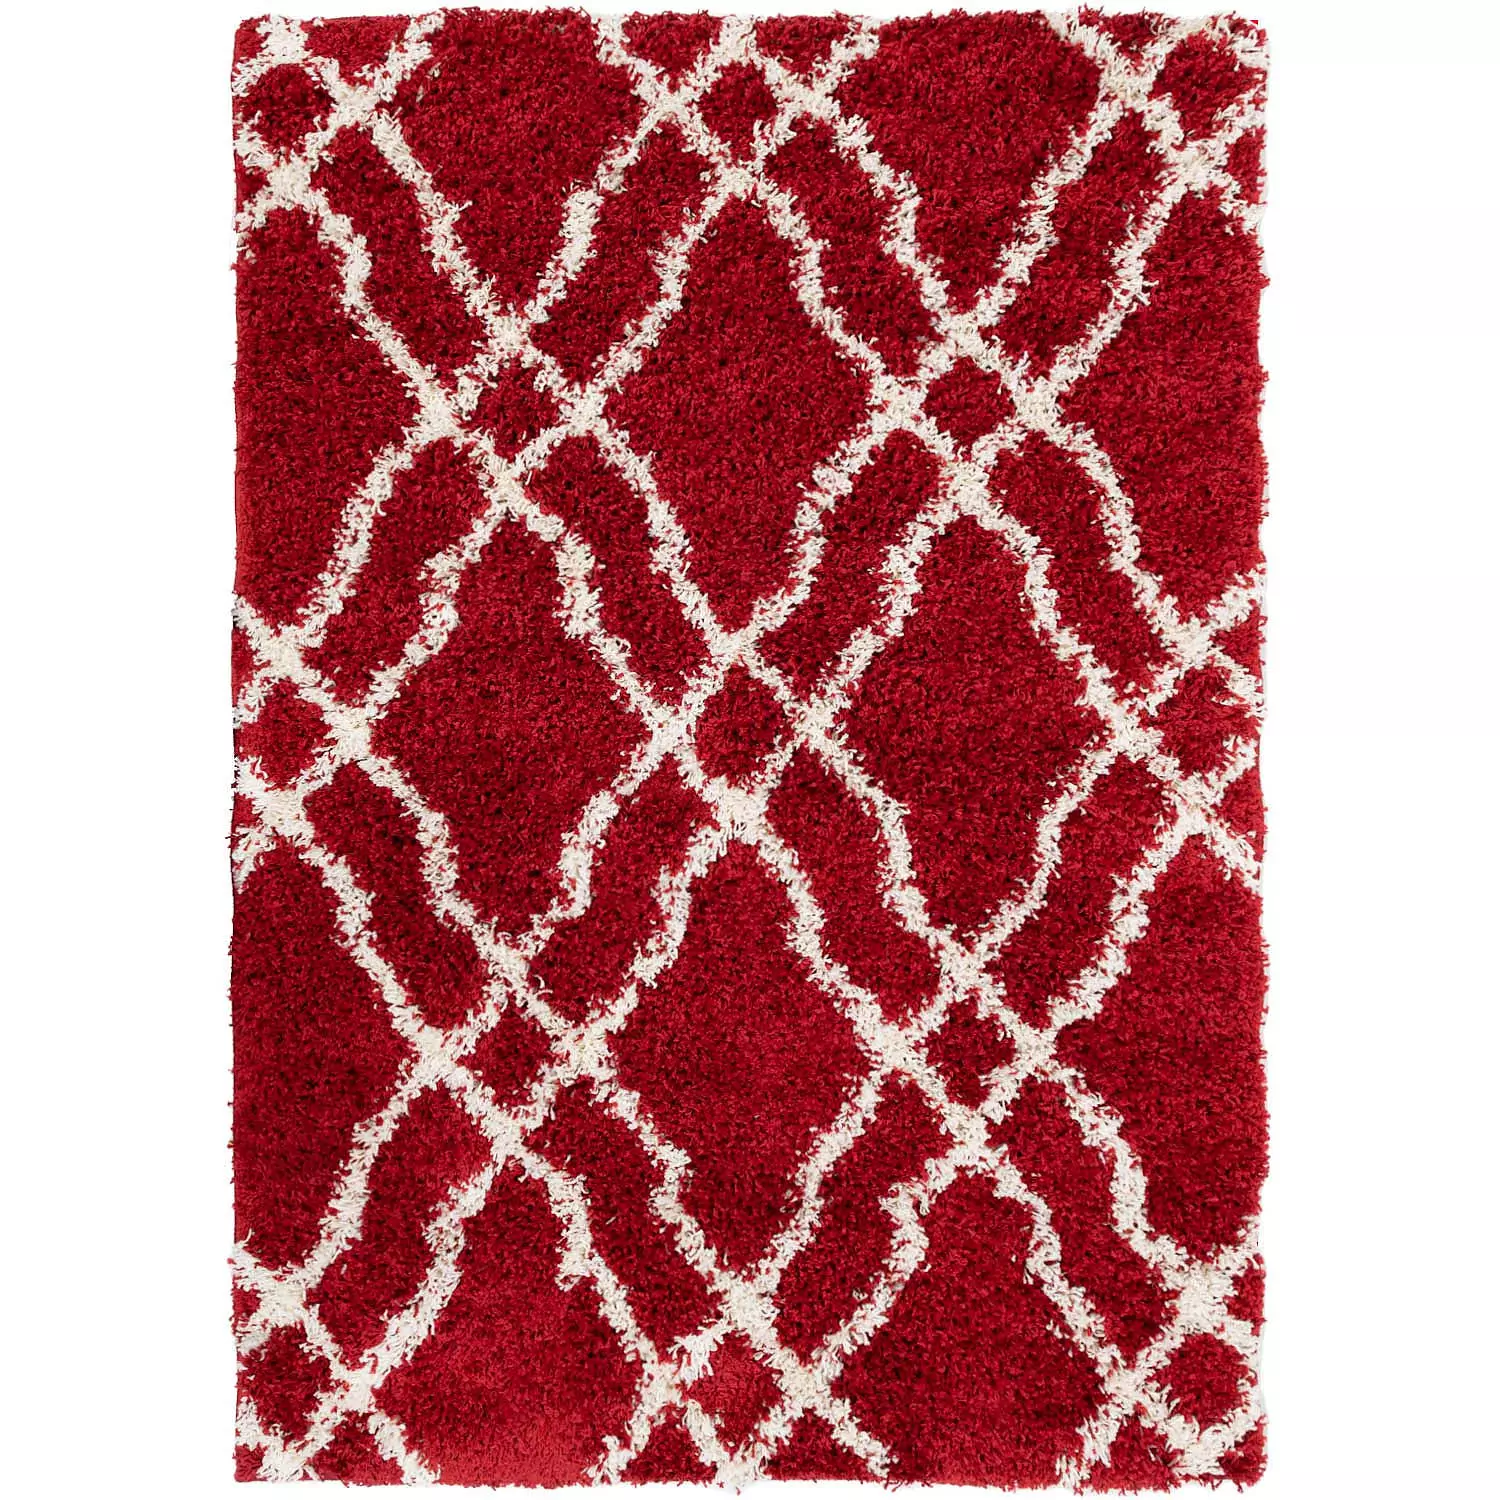 LOLA Collection, decorative area rug, red with squiggly lines, 4'x6'